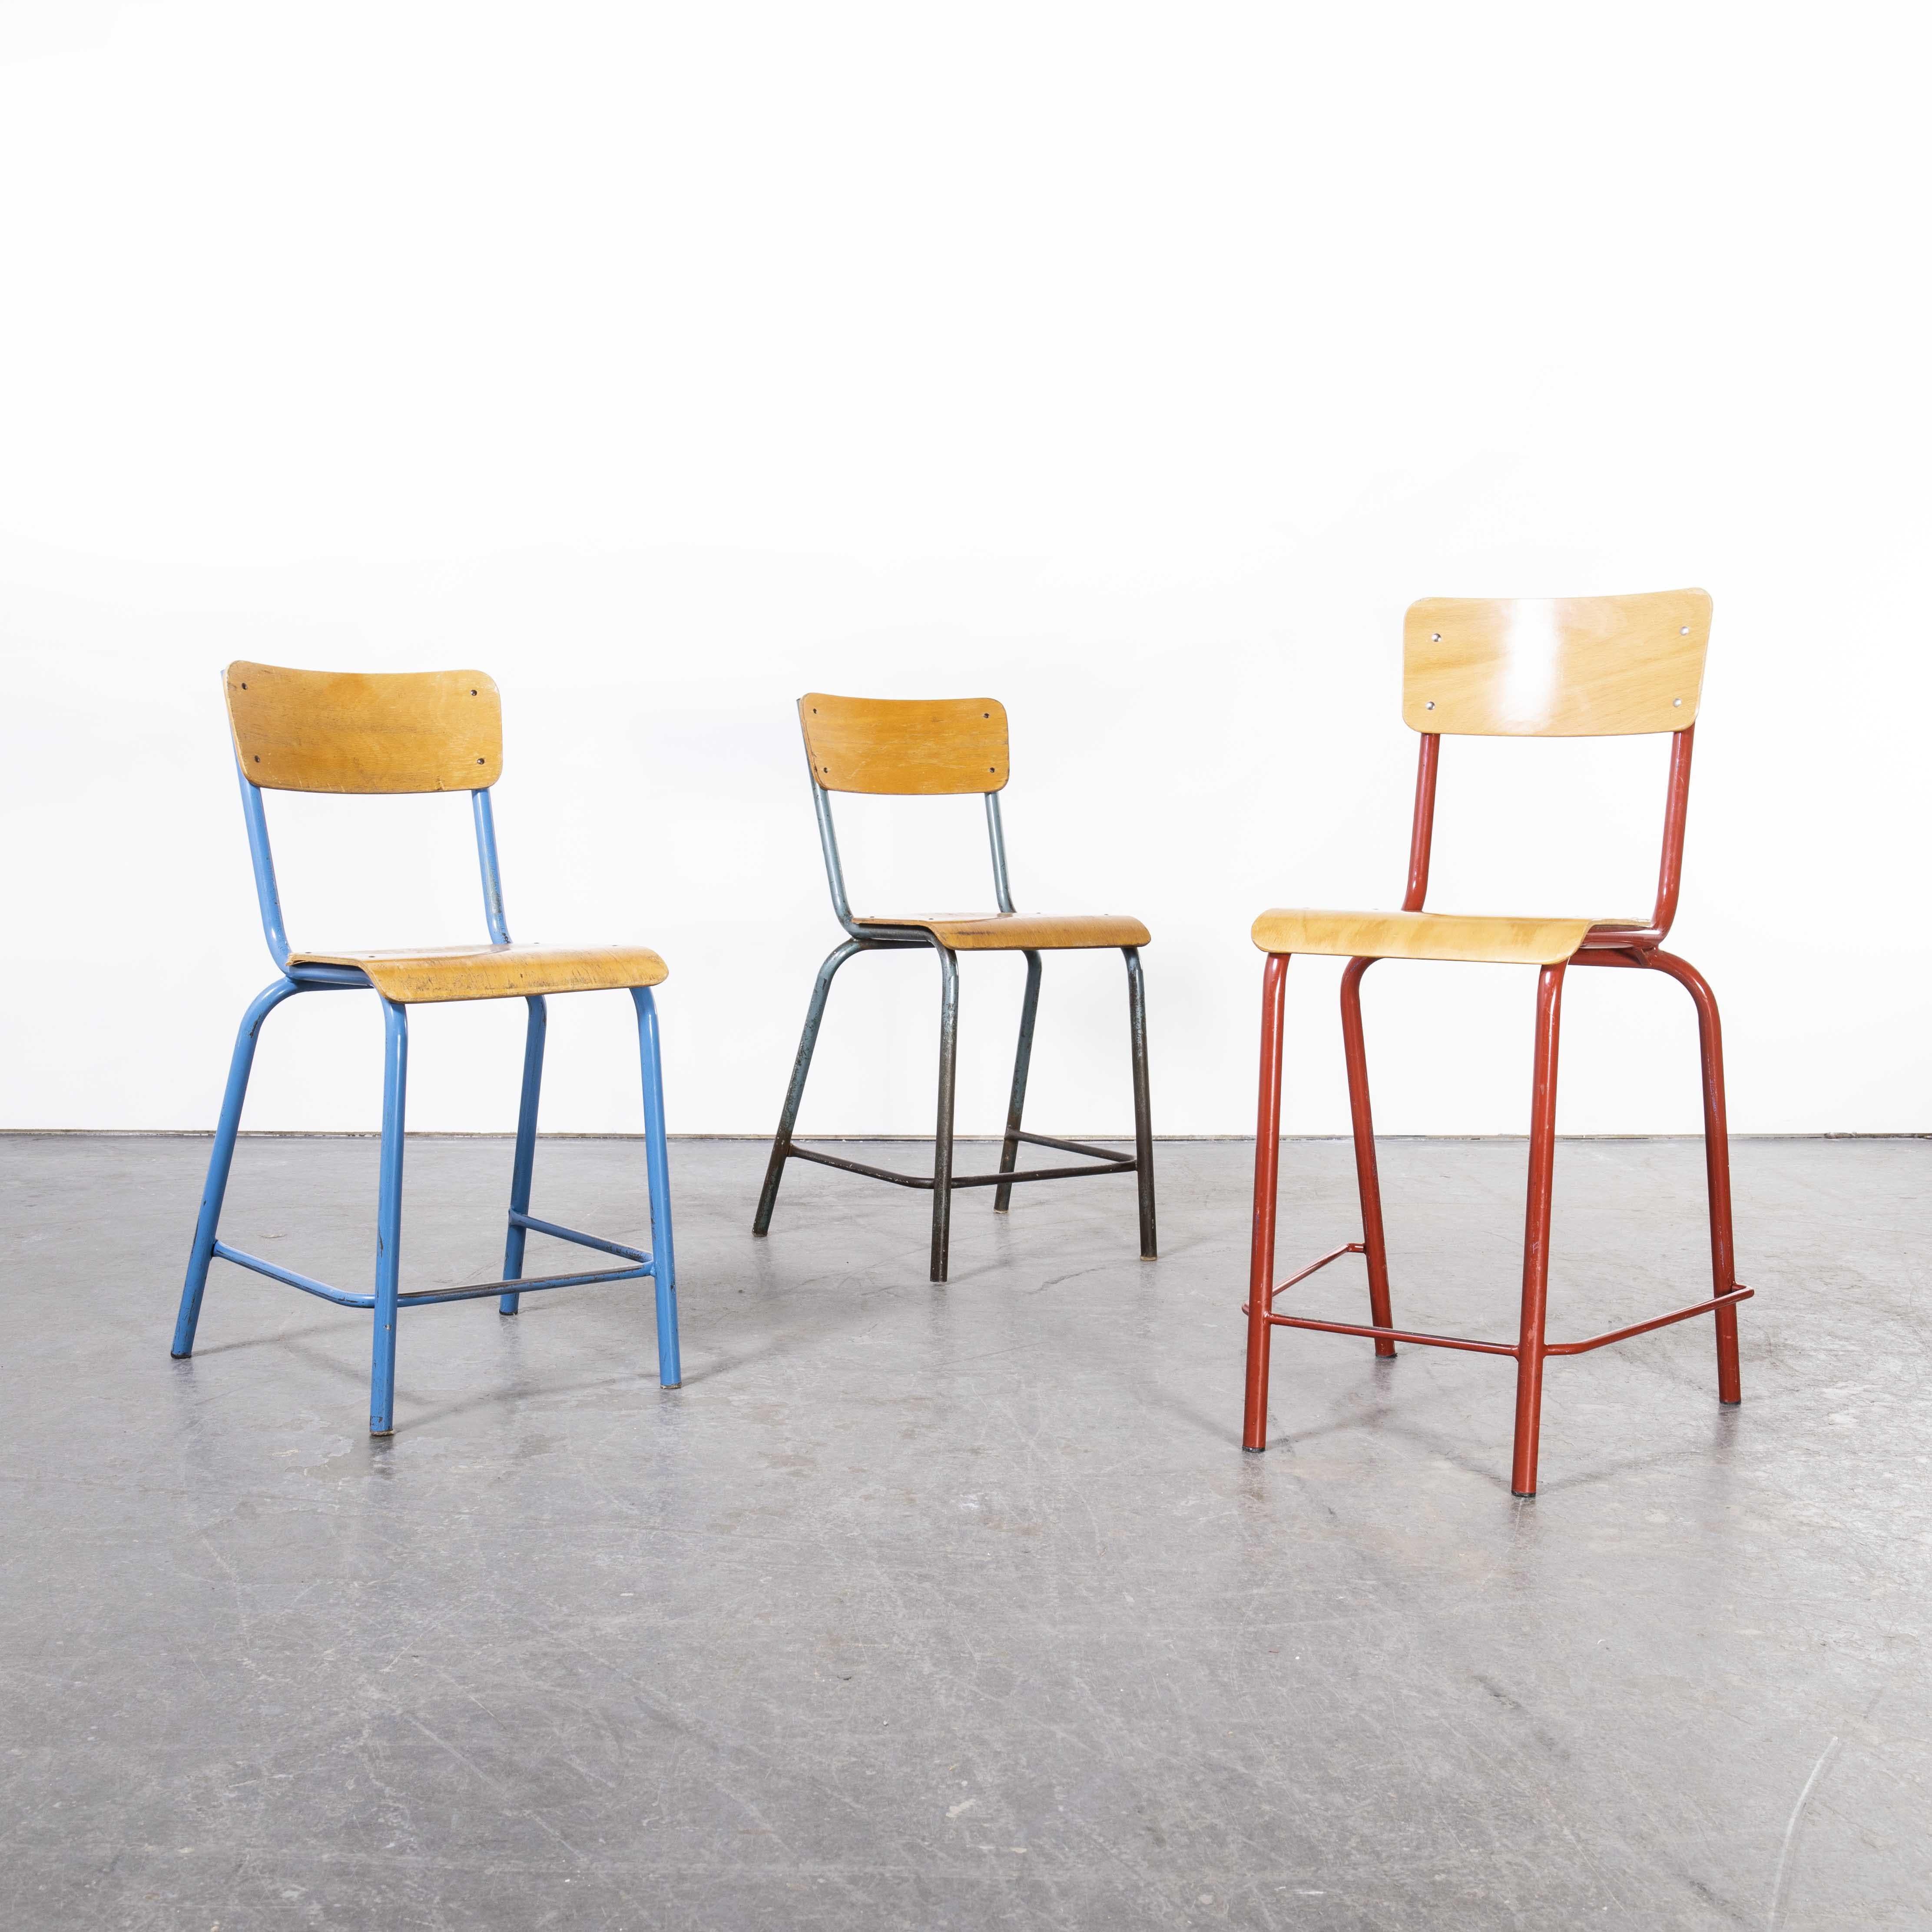 1950’s Mullca High Laboratory Stacking dining chairs – Set Of Three
1950’s Mullca High Laboratory Stacking dining chairs – Set Of Three. One of our most favourite chairs the higher seat (54 cm) laboratory high chairs made by Mullca, with the foot